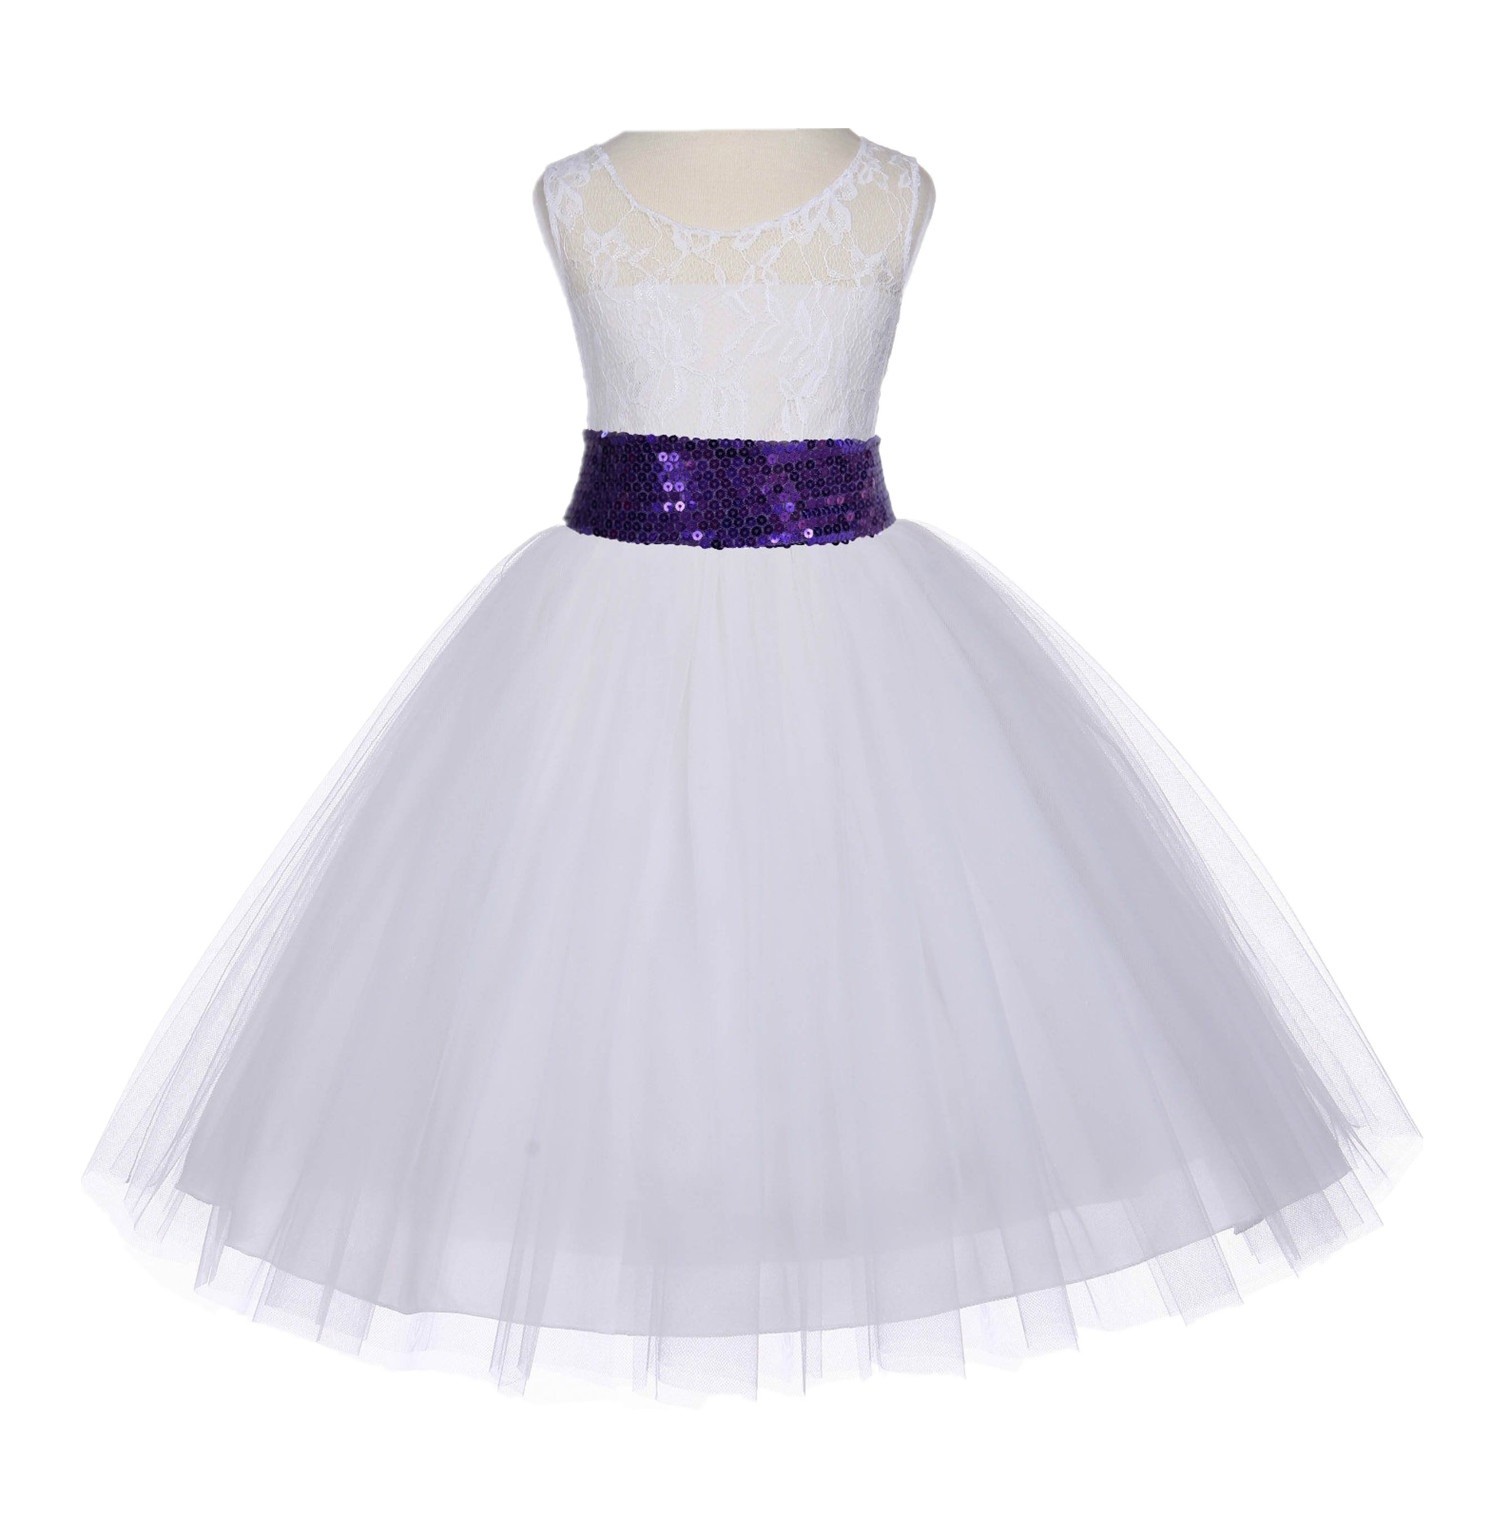 Ivory Floral Lace Bodice Tulle Purple Sequin Flower Girl Dress 153mh